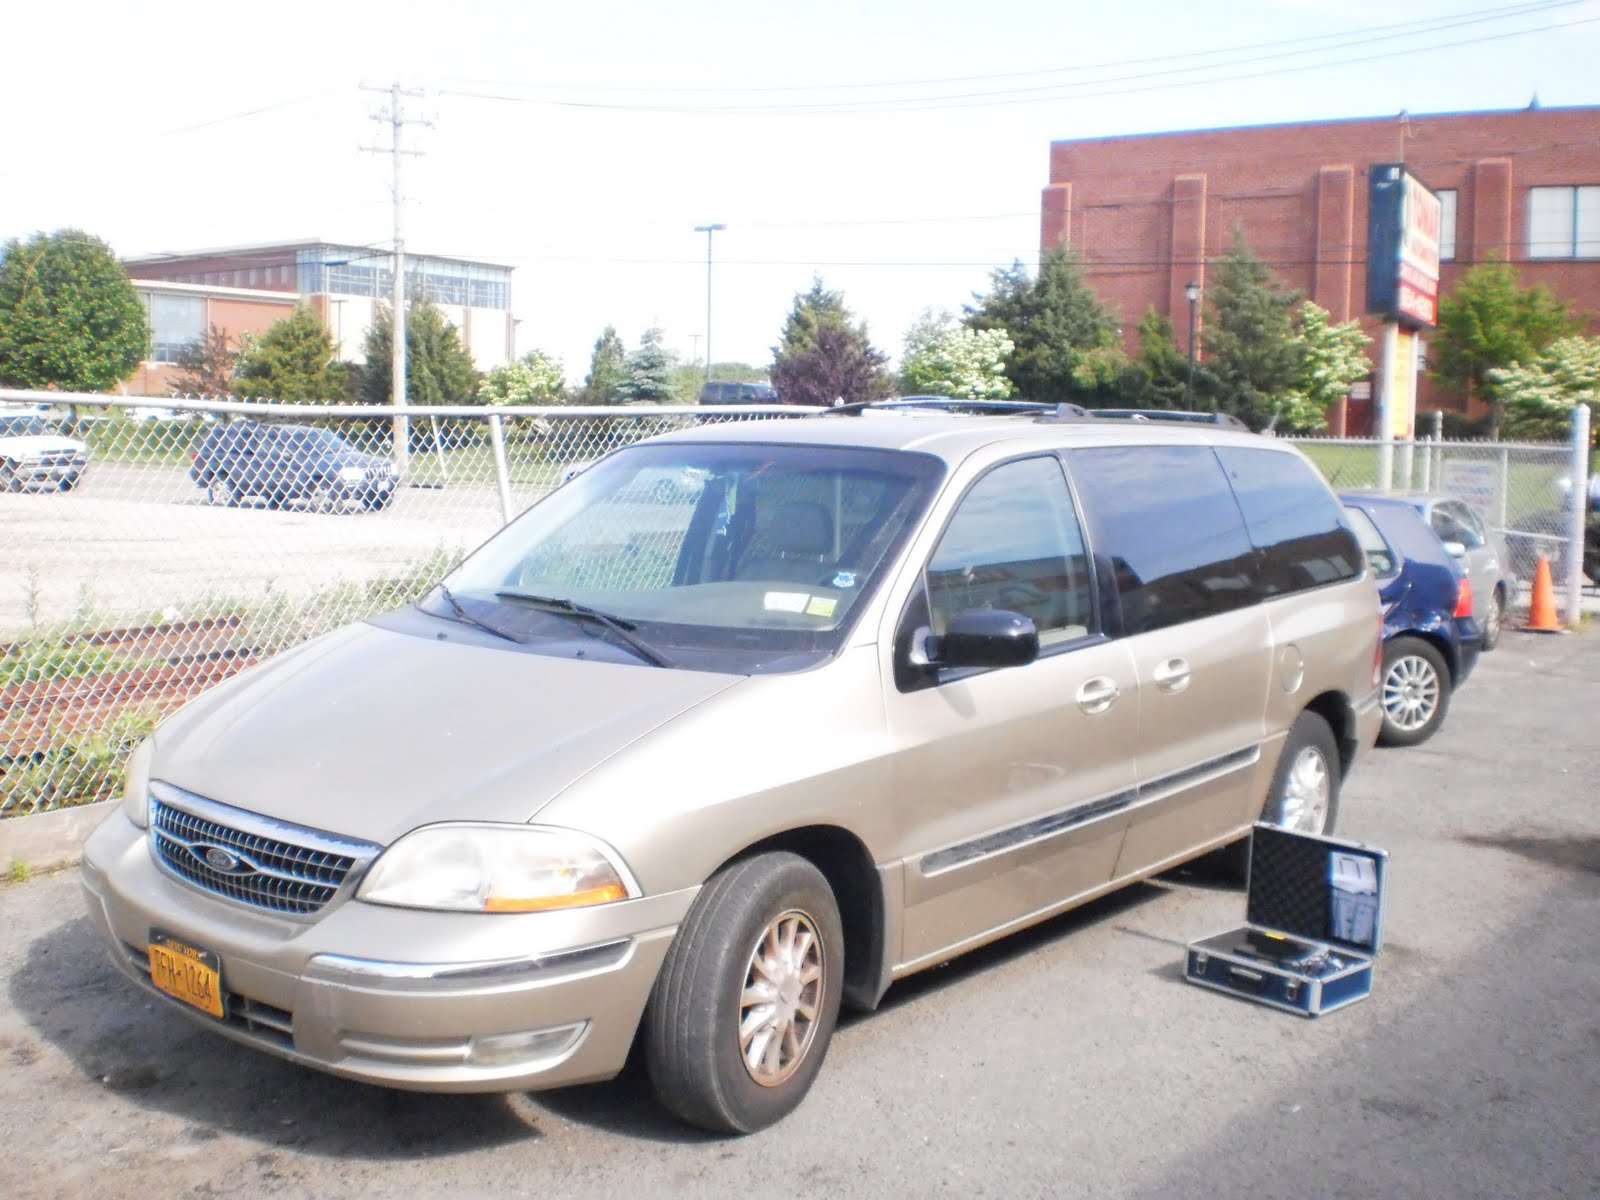 1999 Ford contour owners manual